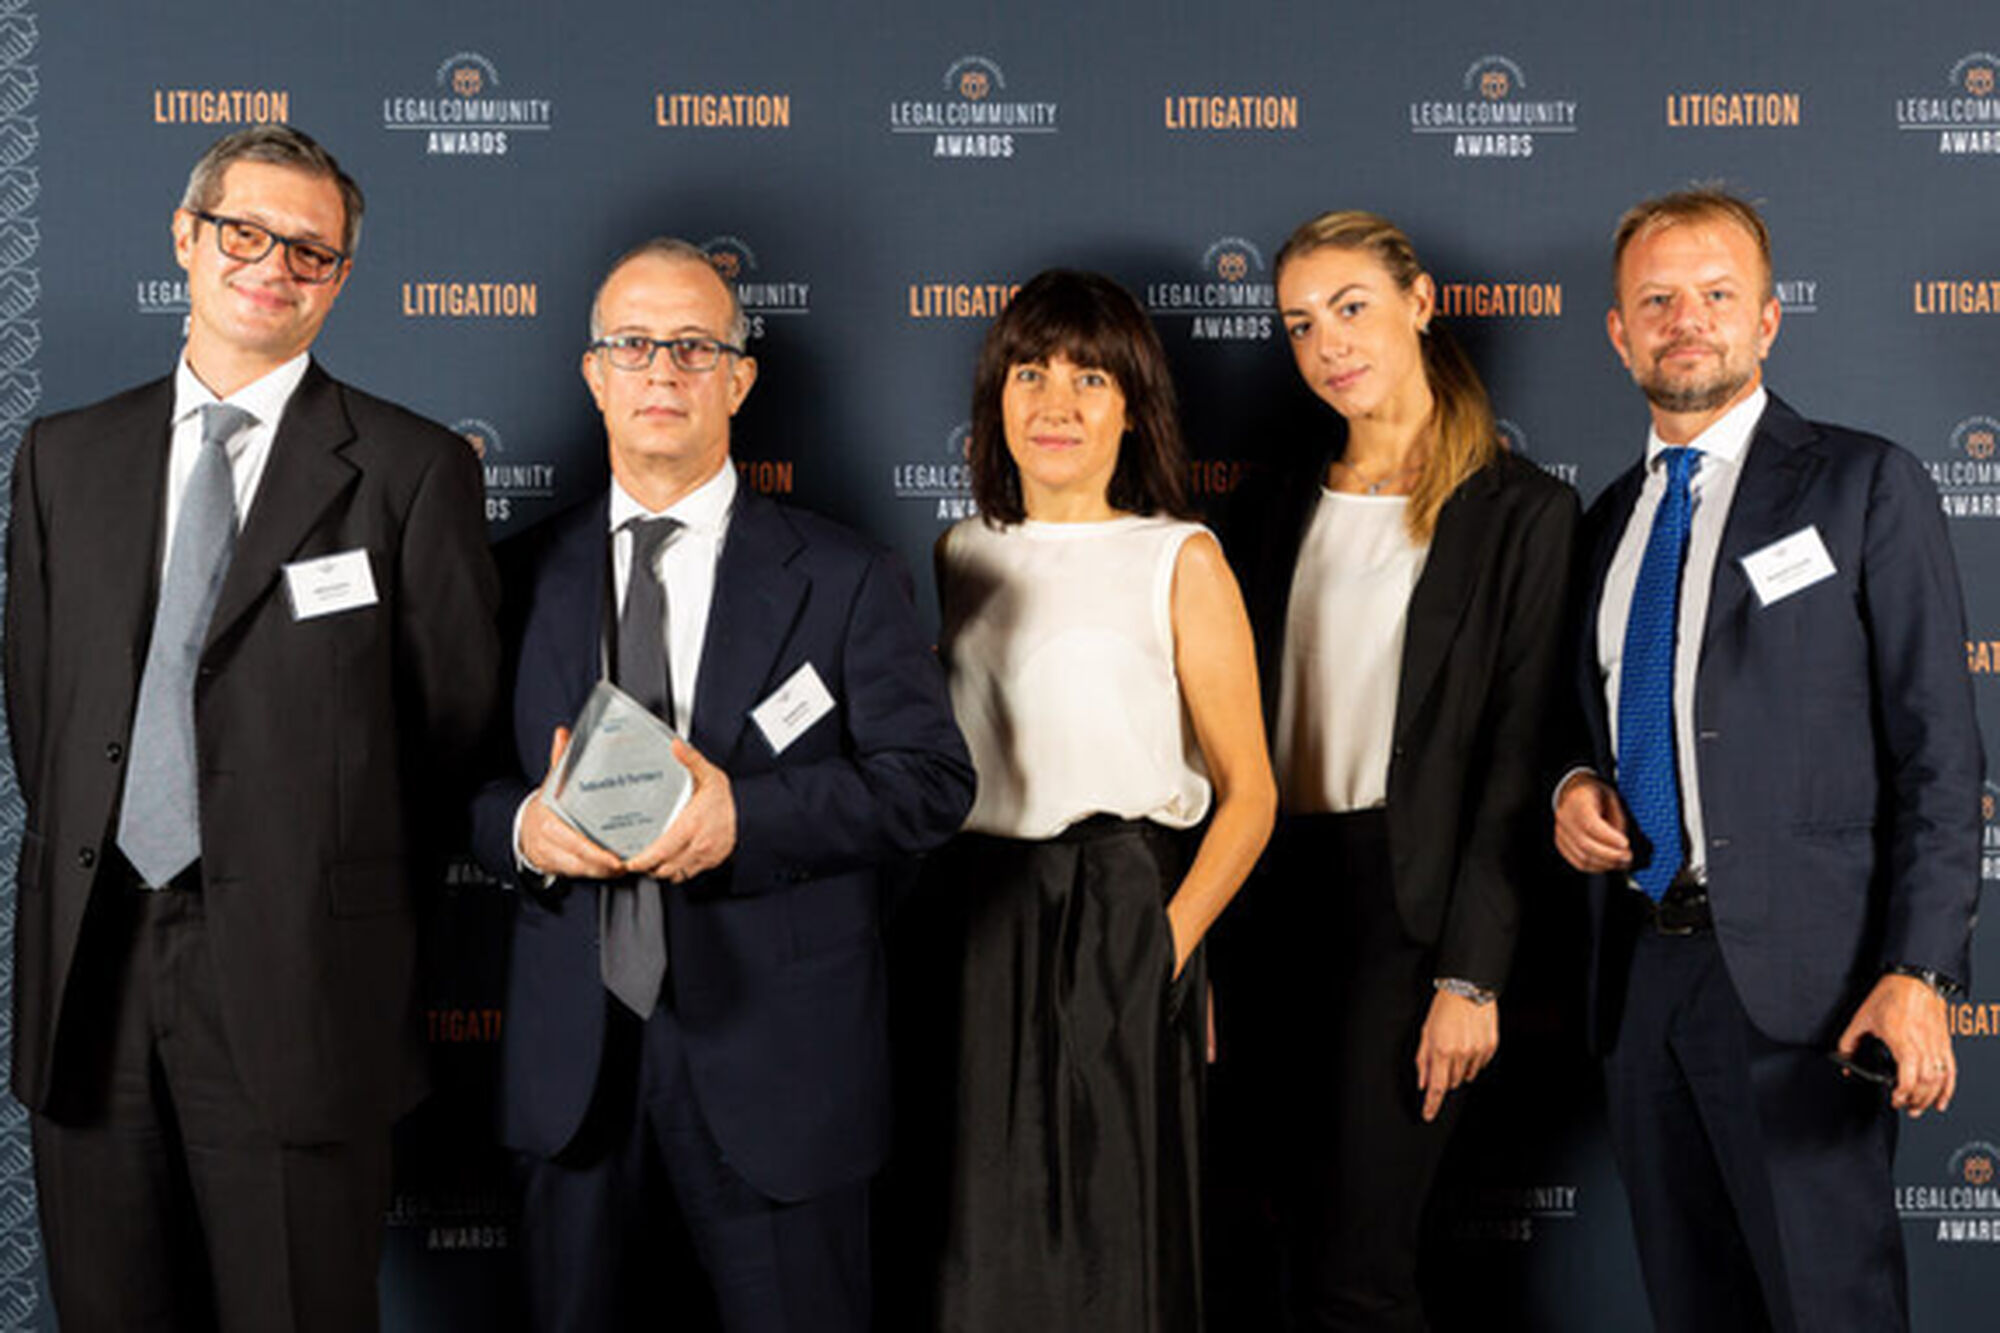 Legalcommunity Litigation Awards 2020: Todarello&Partners is firm of the year.